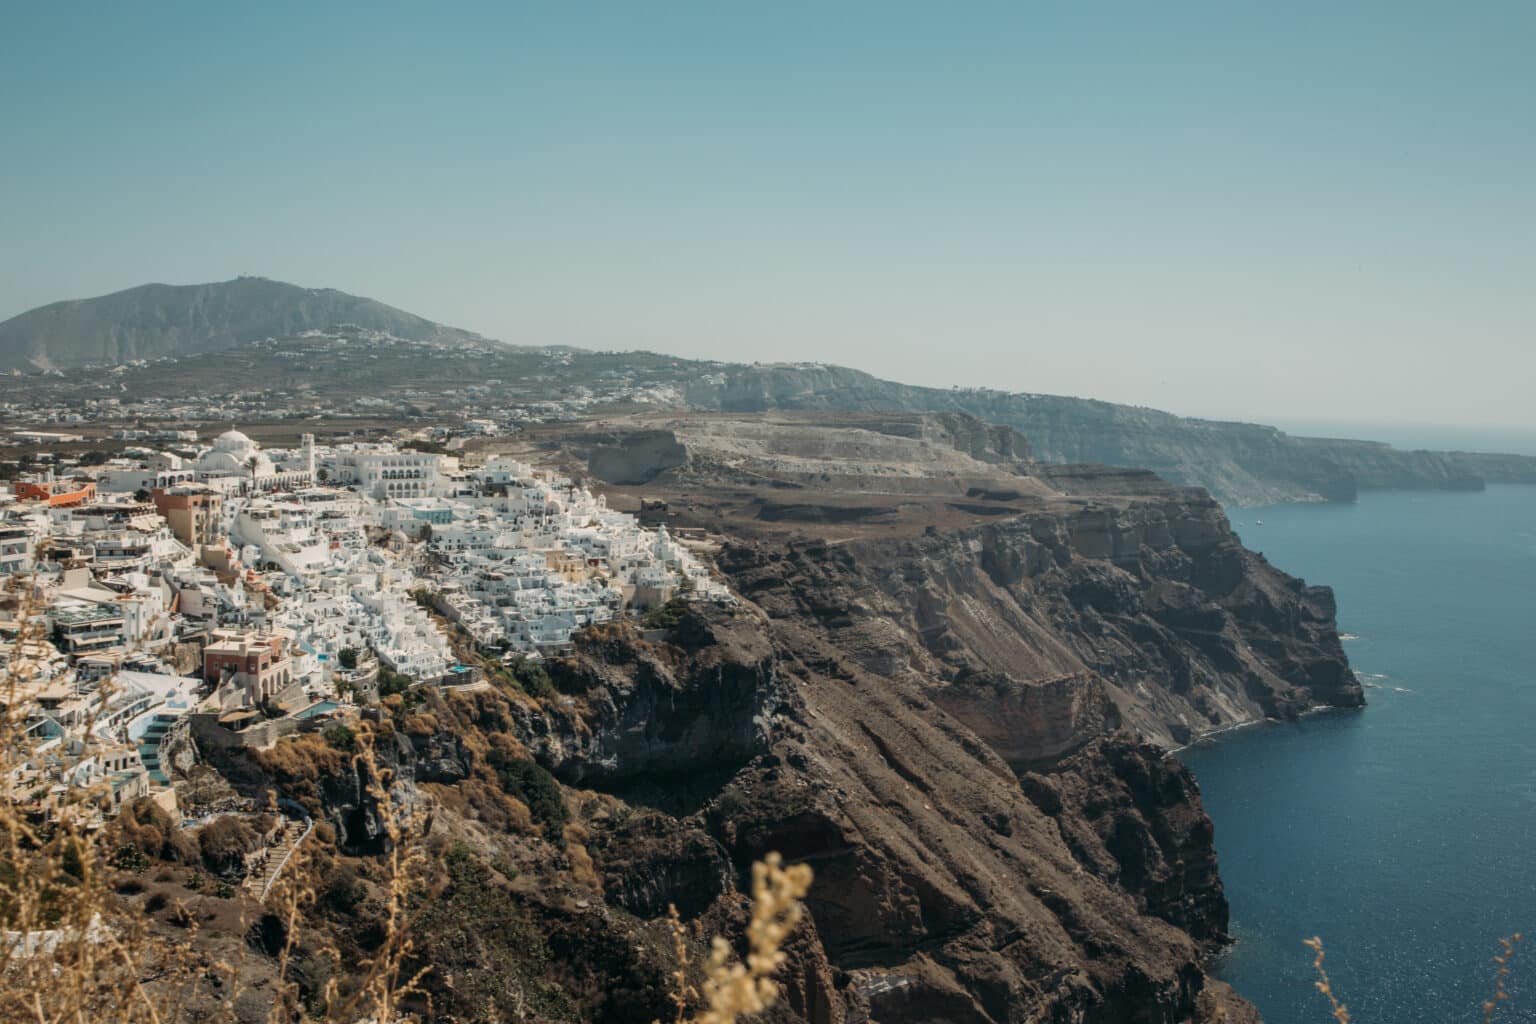 One of the views from the Fira to Oia hike.